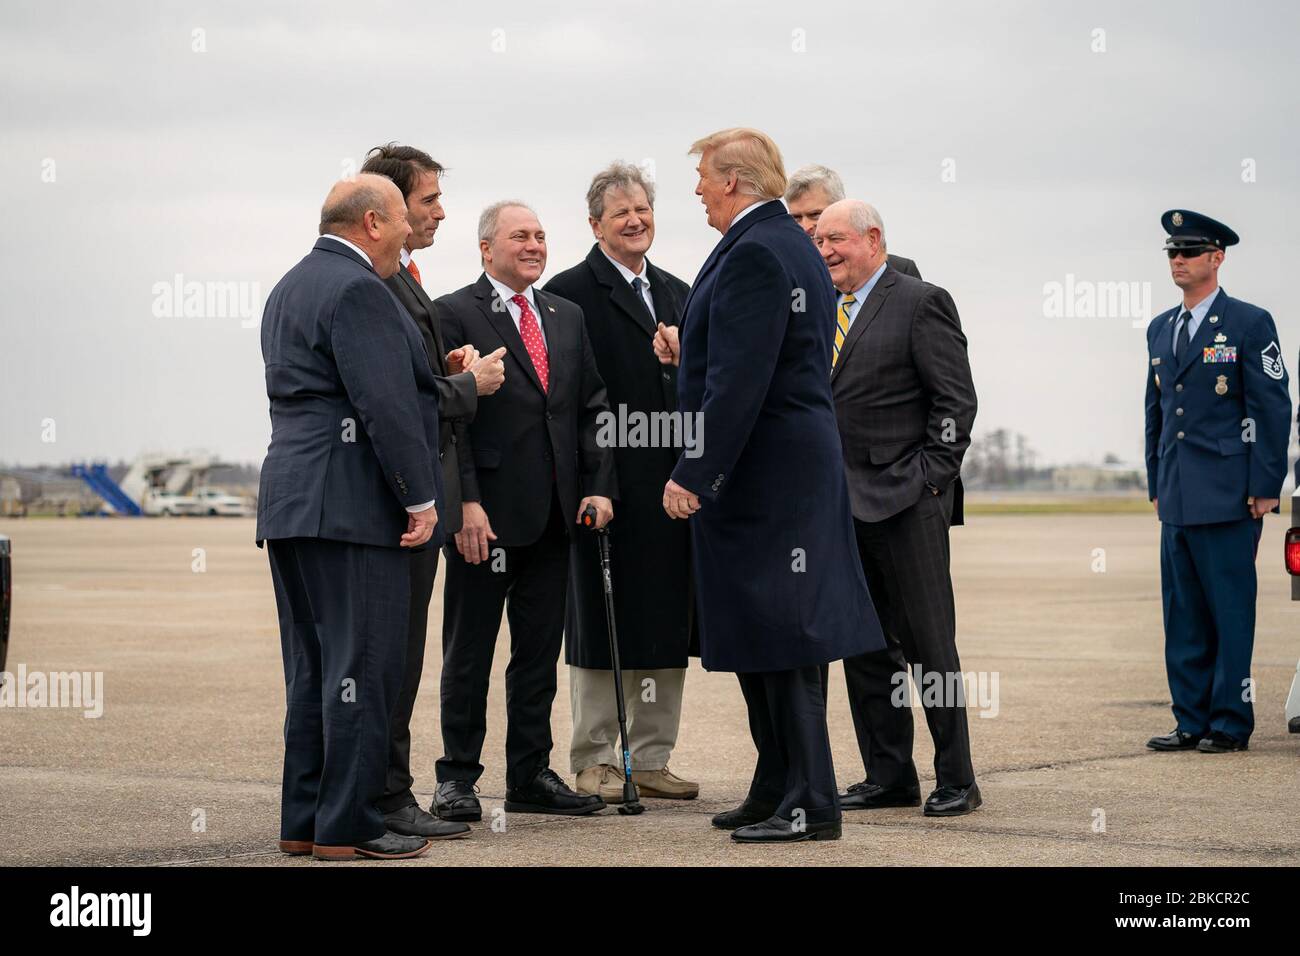 President Donald J. Trump arrives at Louis Armstrong New Orleans International Airport Monday, January 14, 2019, and is greeted by guests. From left, Zippy Duvall, the President of the American Farm Bureau Federation; Rep. Garrett Graves (R-LA); House Minority Whip Rep. Steve Scalise (R-LA); Senator John Kennedy (R-LA); Senator Bill Cassidy (R-LA); and Secretary of Agriculture Sonny Perdue. President Trump Arrives in New Orleans Stock Photo